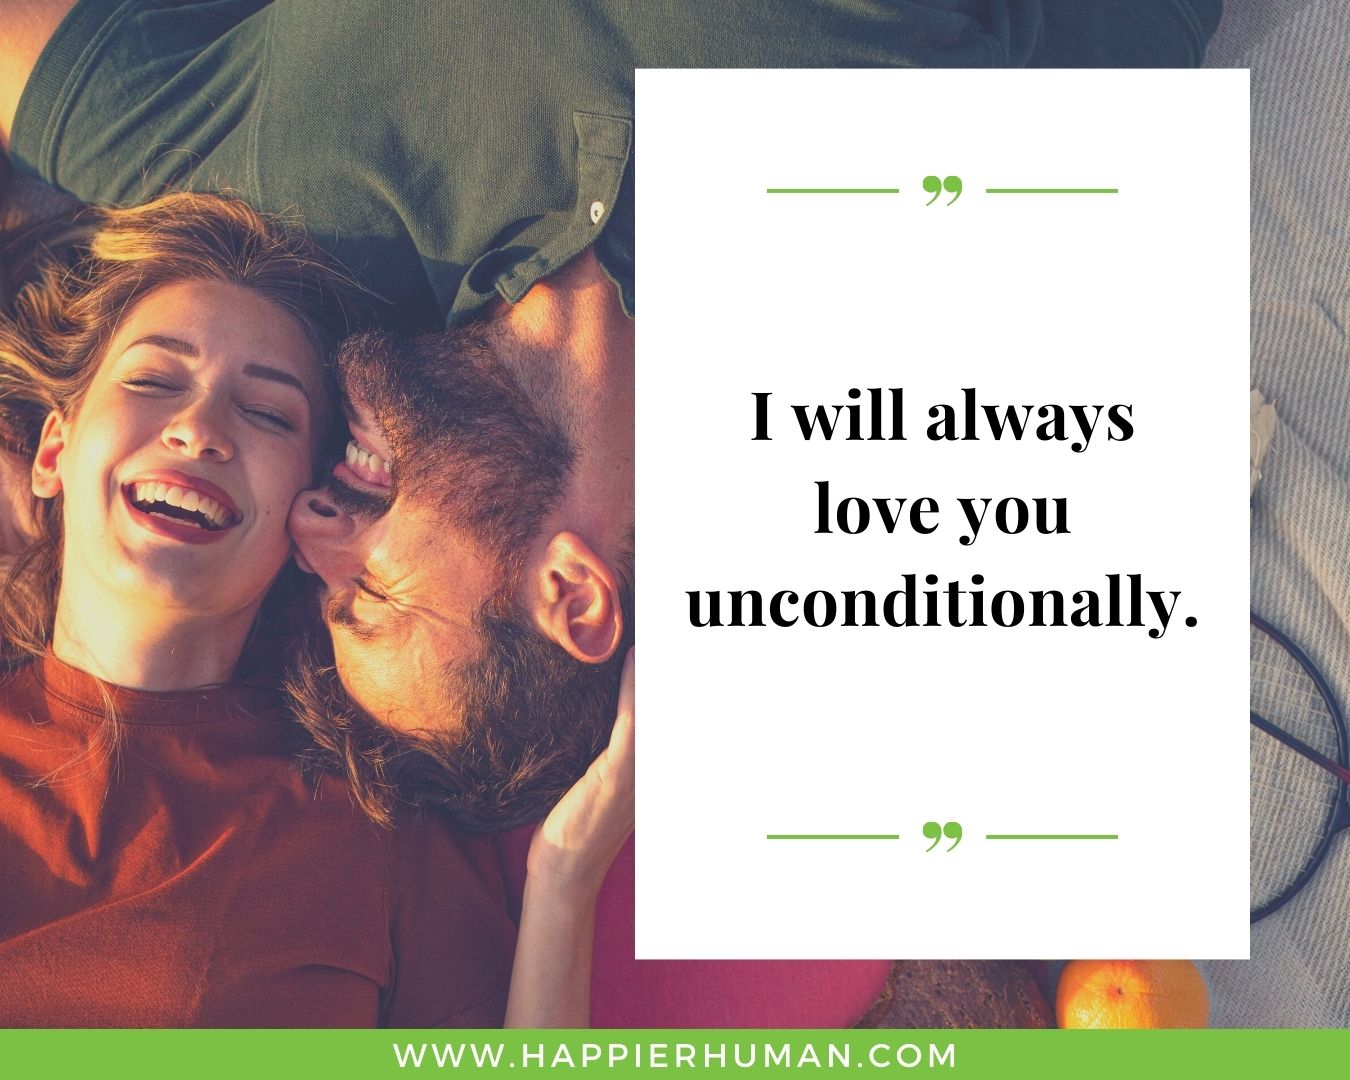 Find the words to tell her you love her- “I will always love you uncondtionally. ”